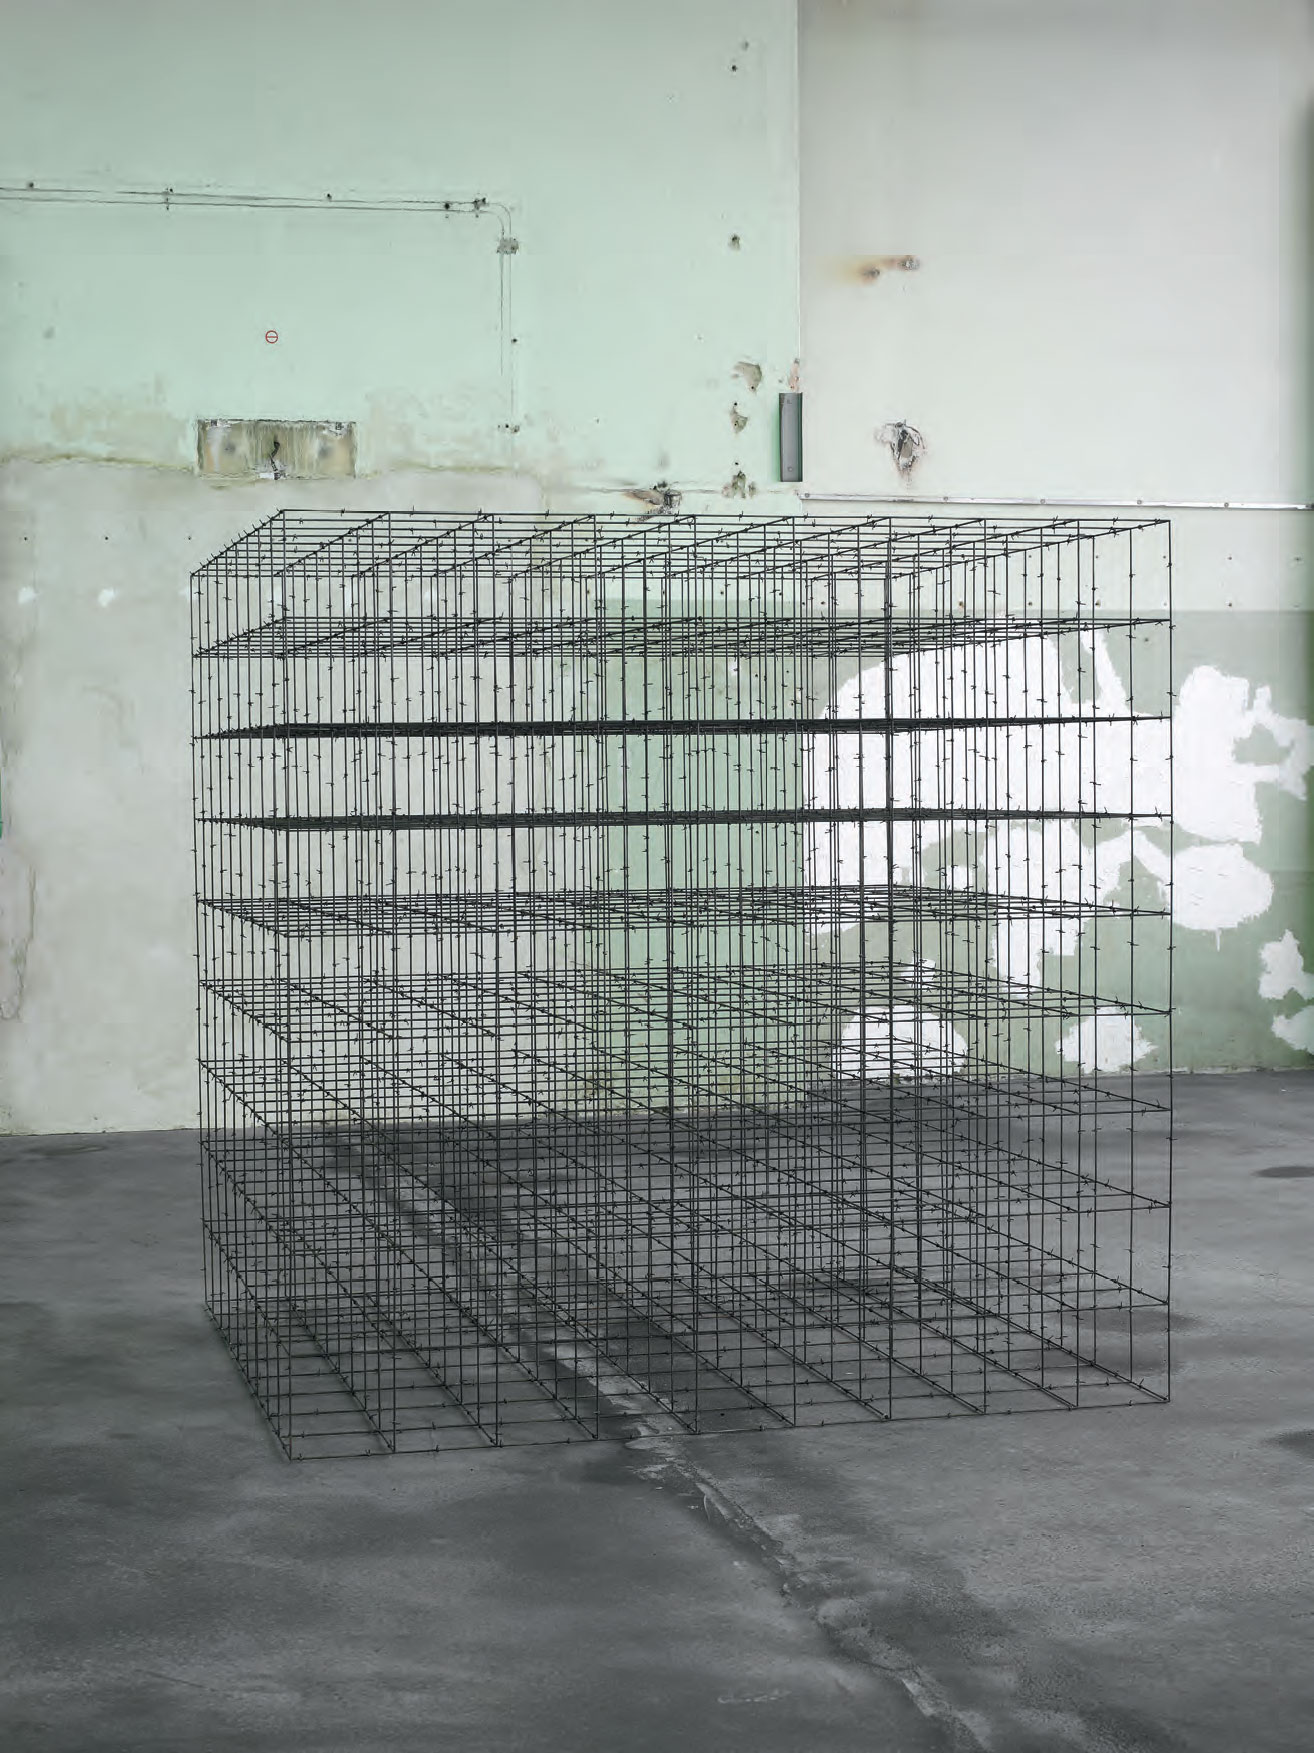 Cube (2008) by Mona Hatoum. As reproduced in our Contemporary Artist Series book